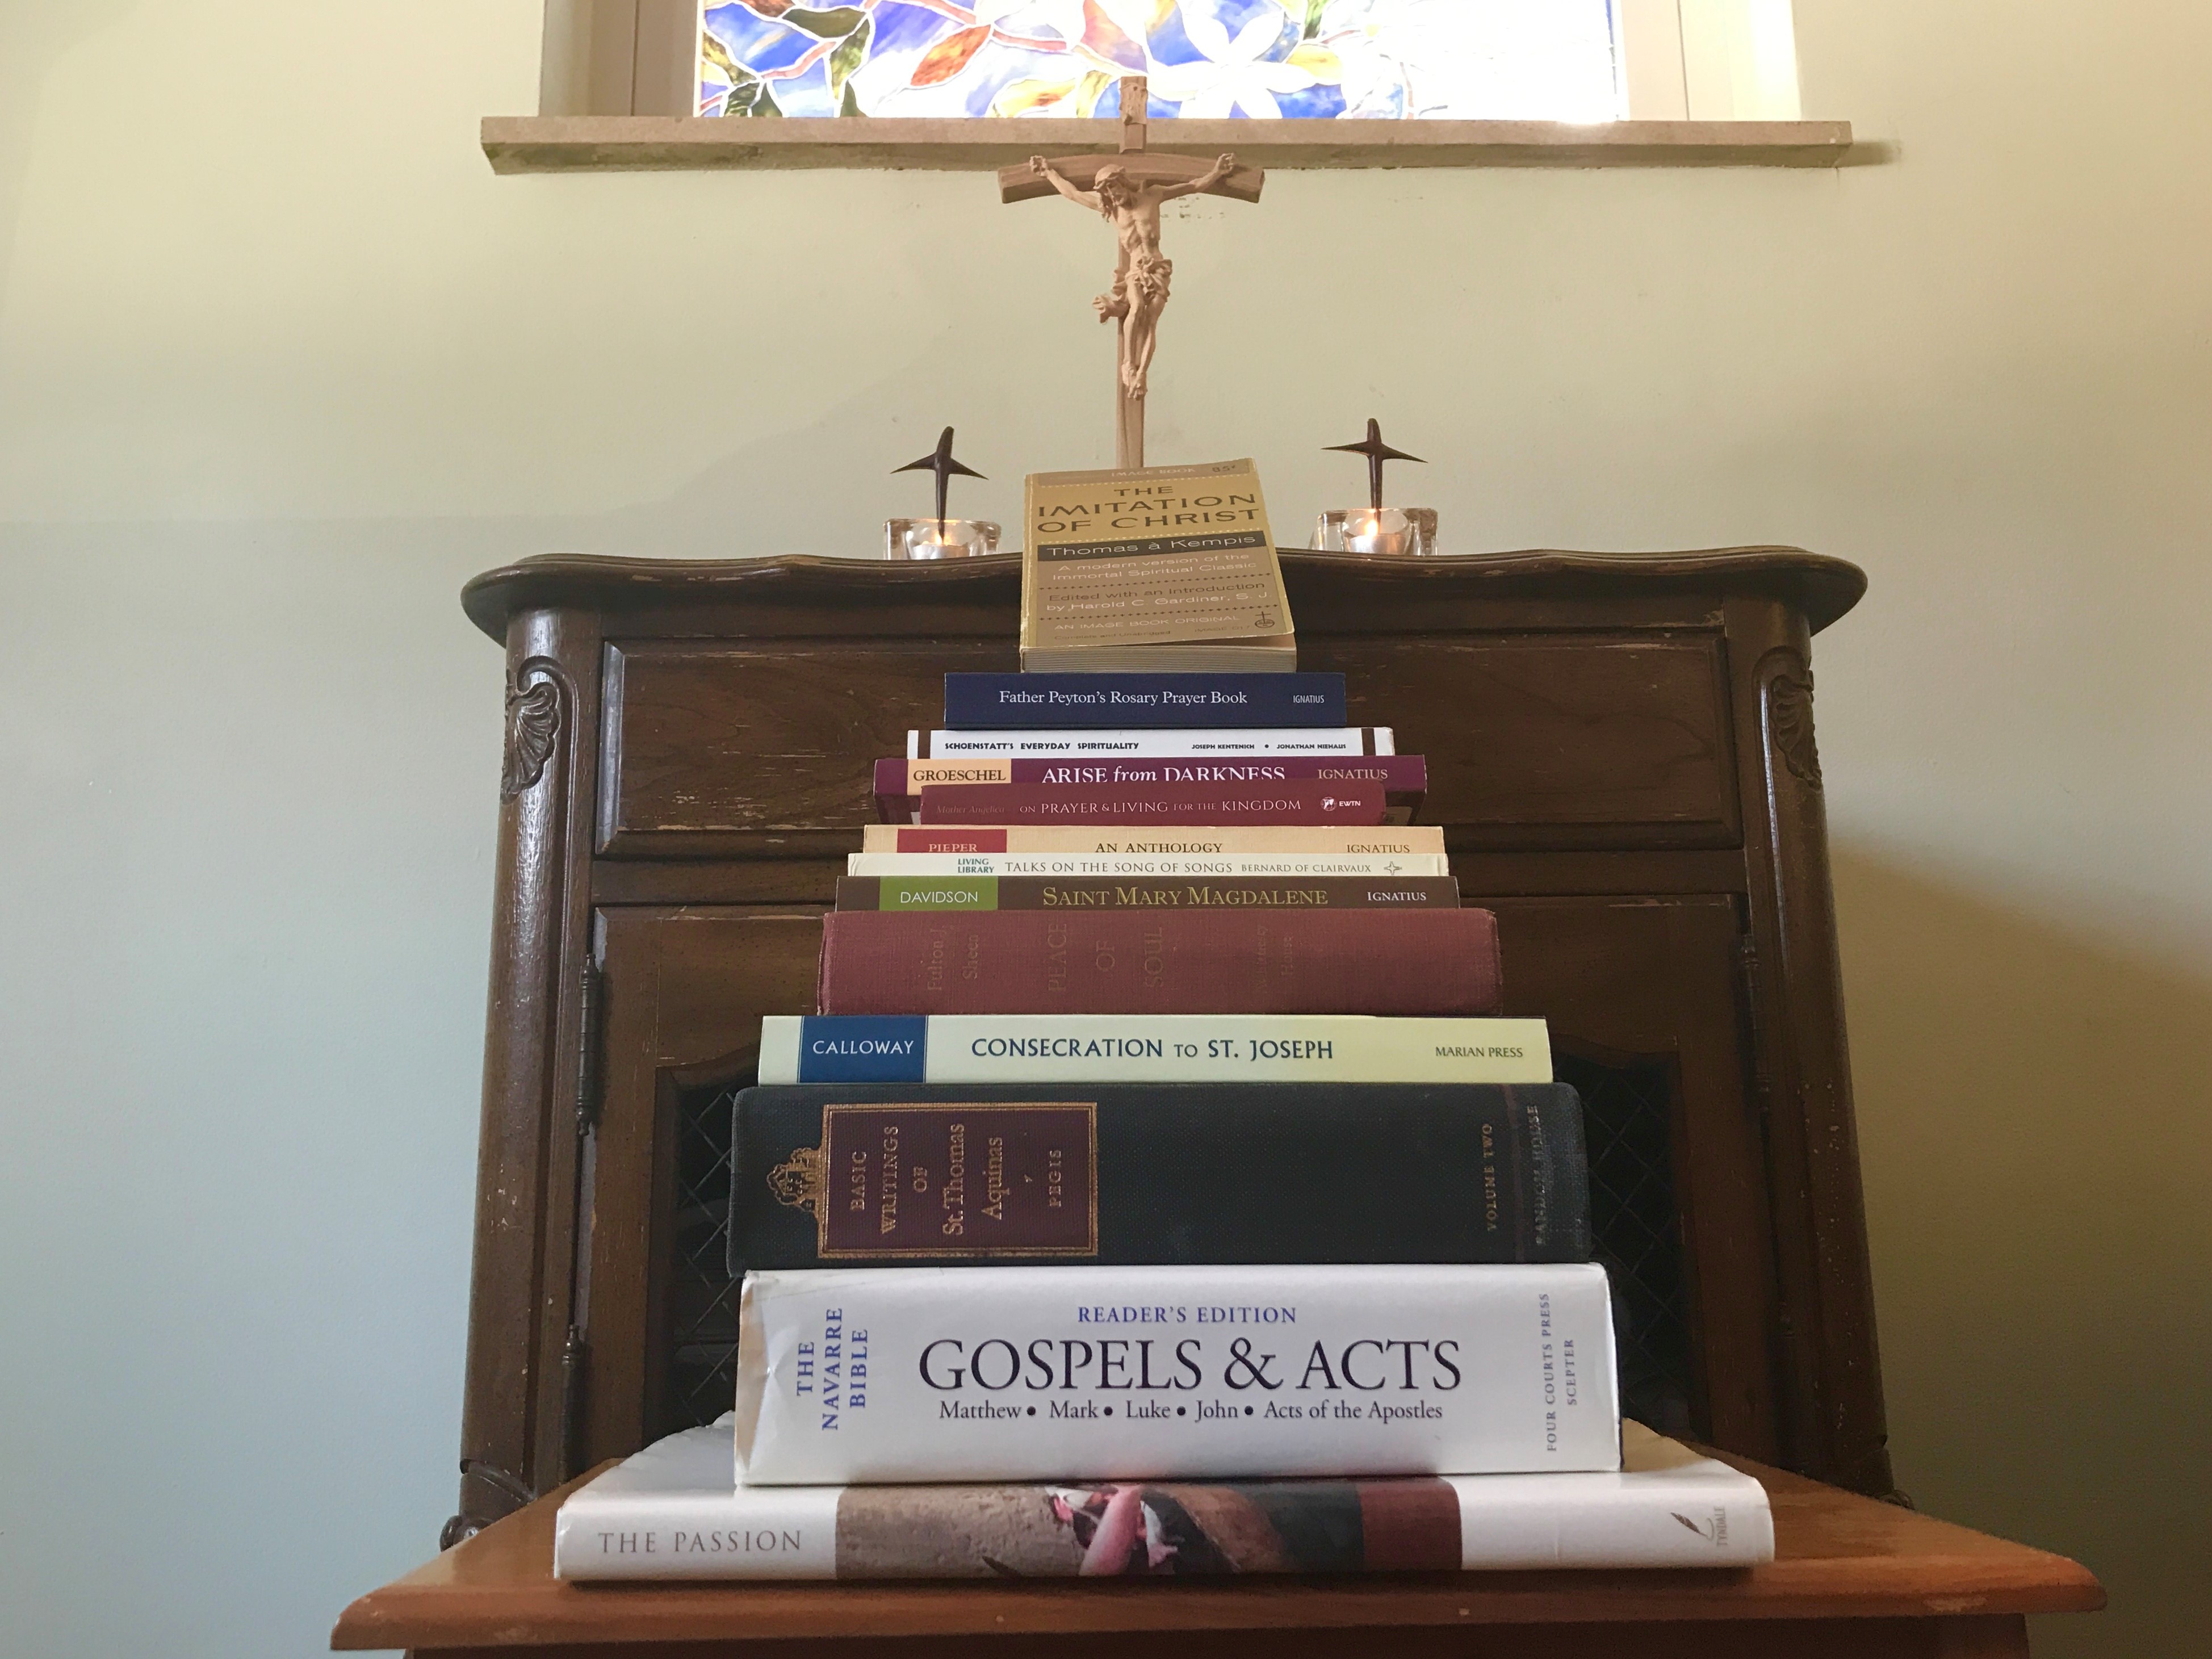 stack of spiritual books arranged stair-step-fashion with crucifix and candles on table at top.